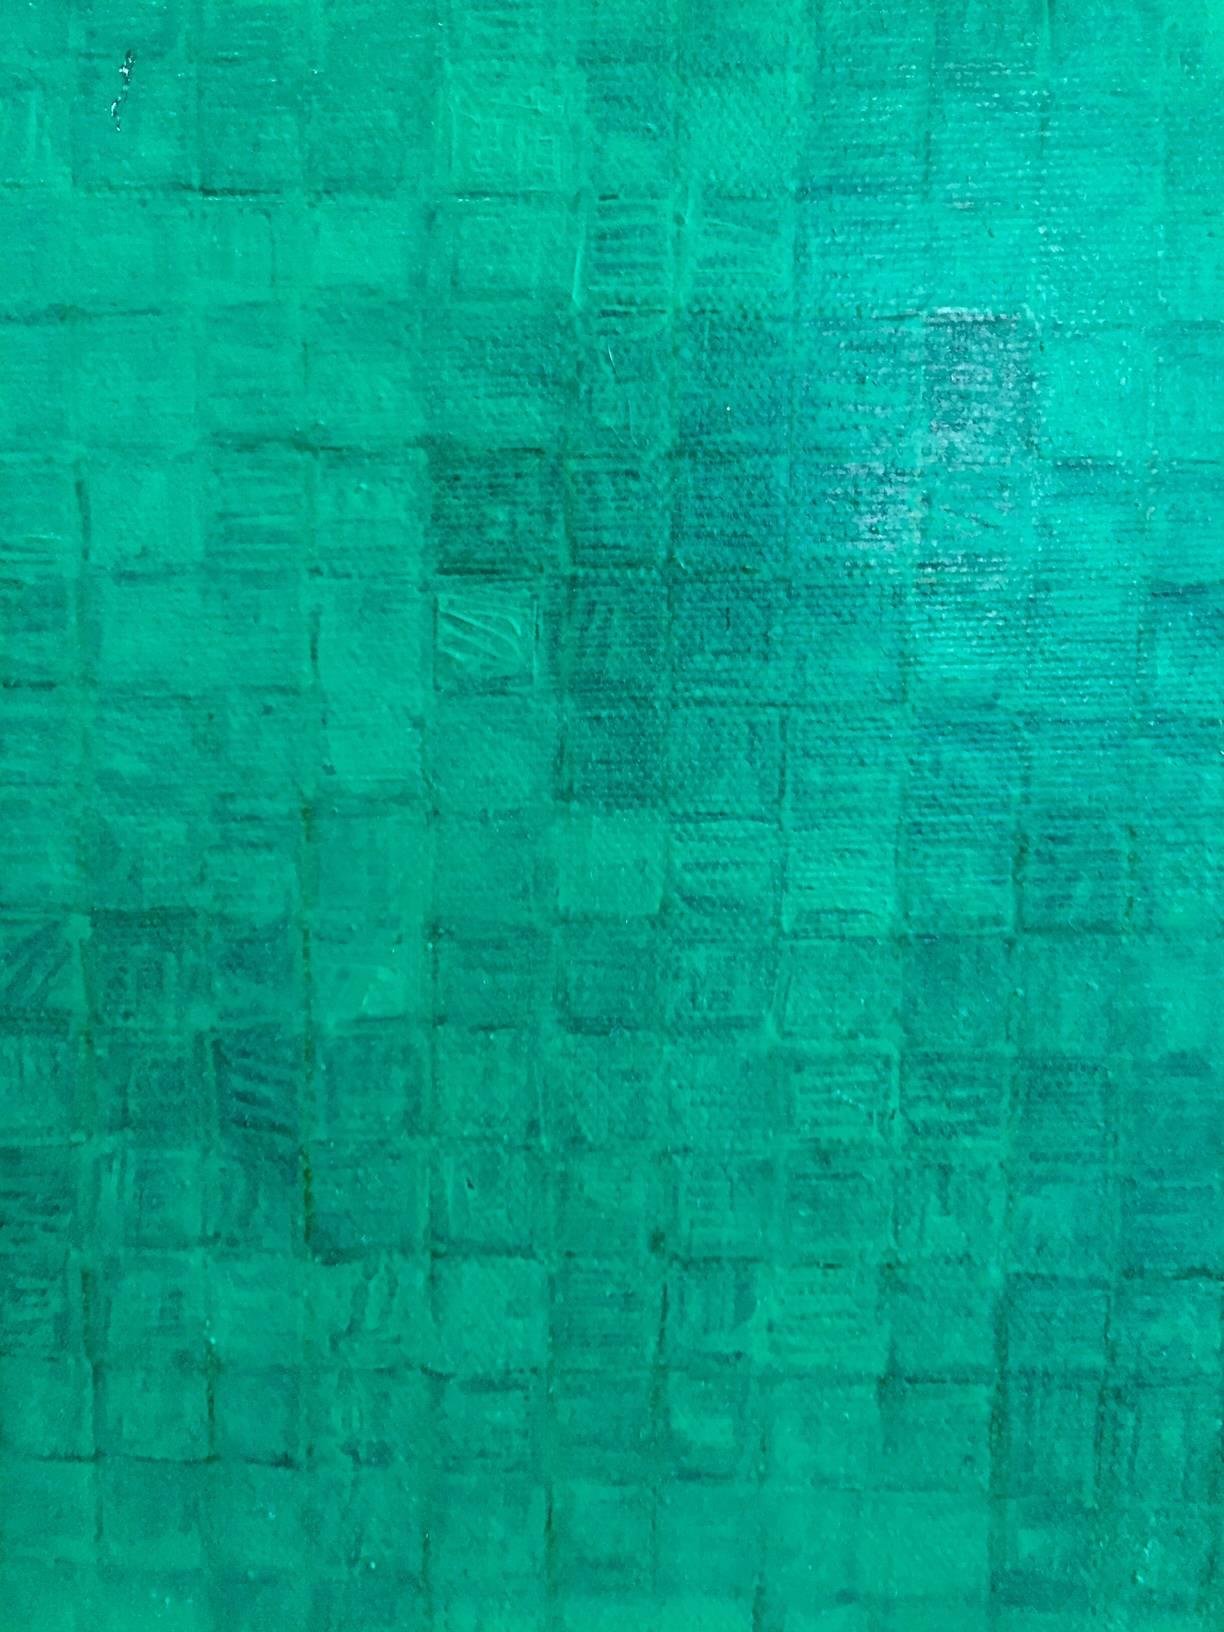 Oil painting inspired by Taoist teachings and meditations, with a focus on color, rhythm and flow. 'Emerald' meditates on the purity of green. Matuszewski creates harmonious color field paintings to invoke a sense of peace and placement. Each